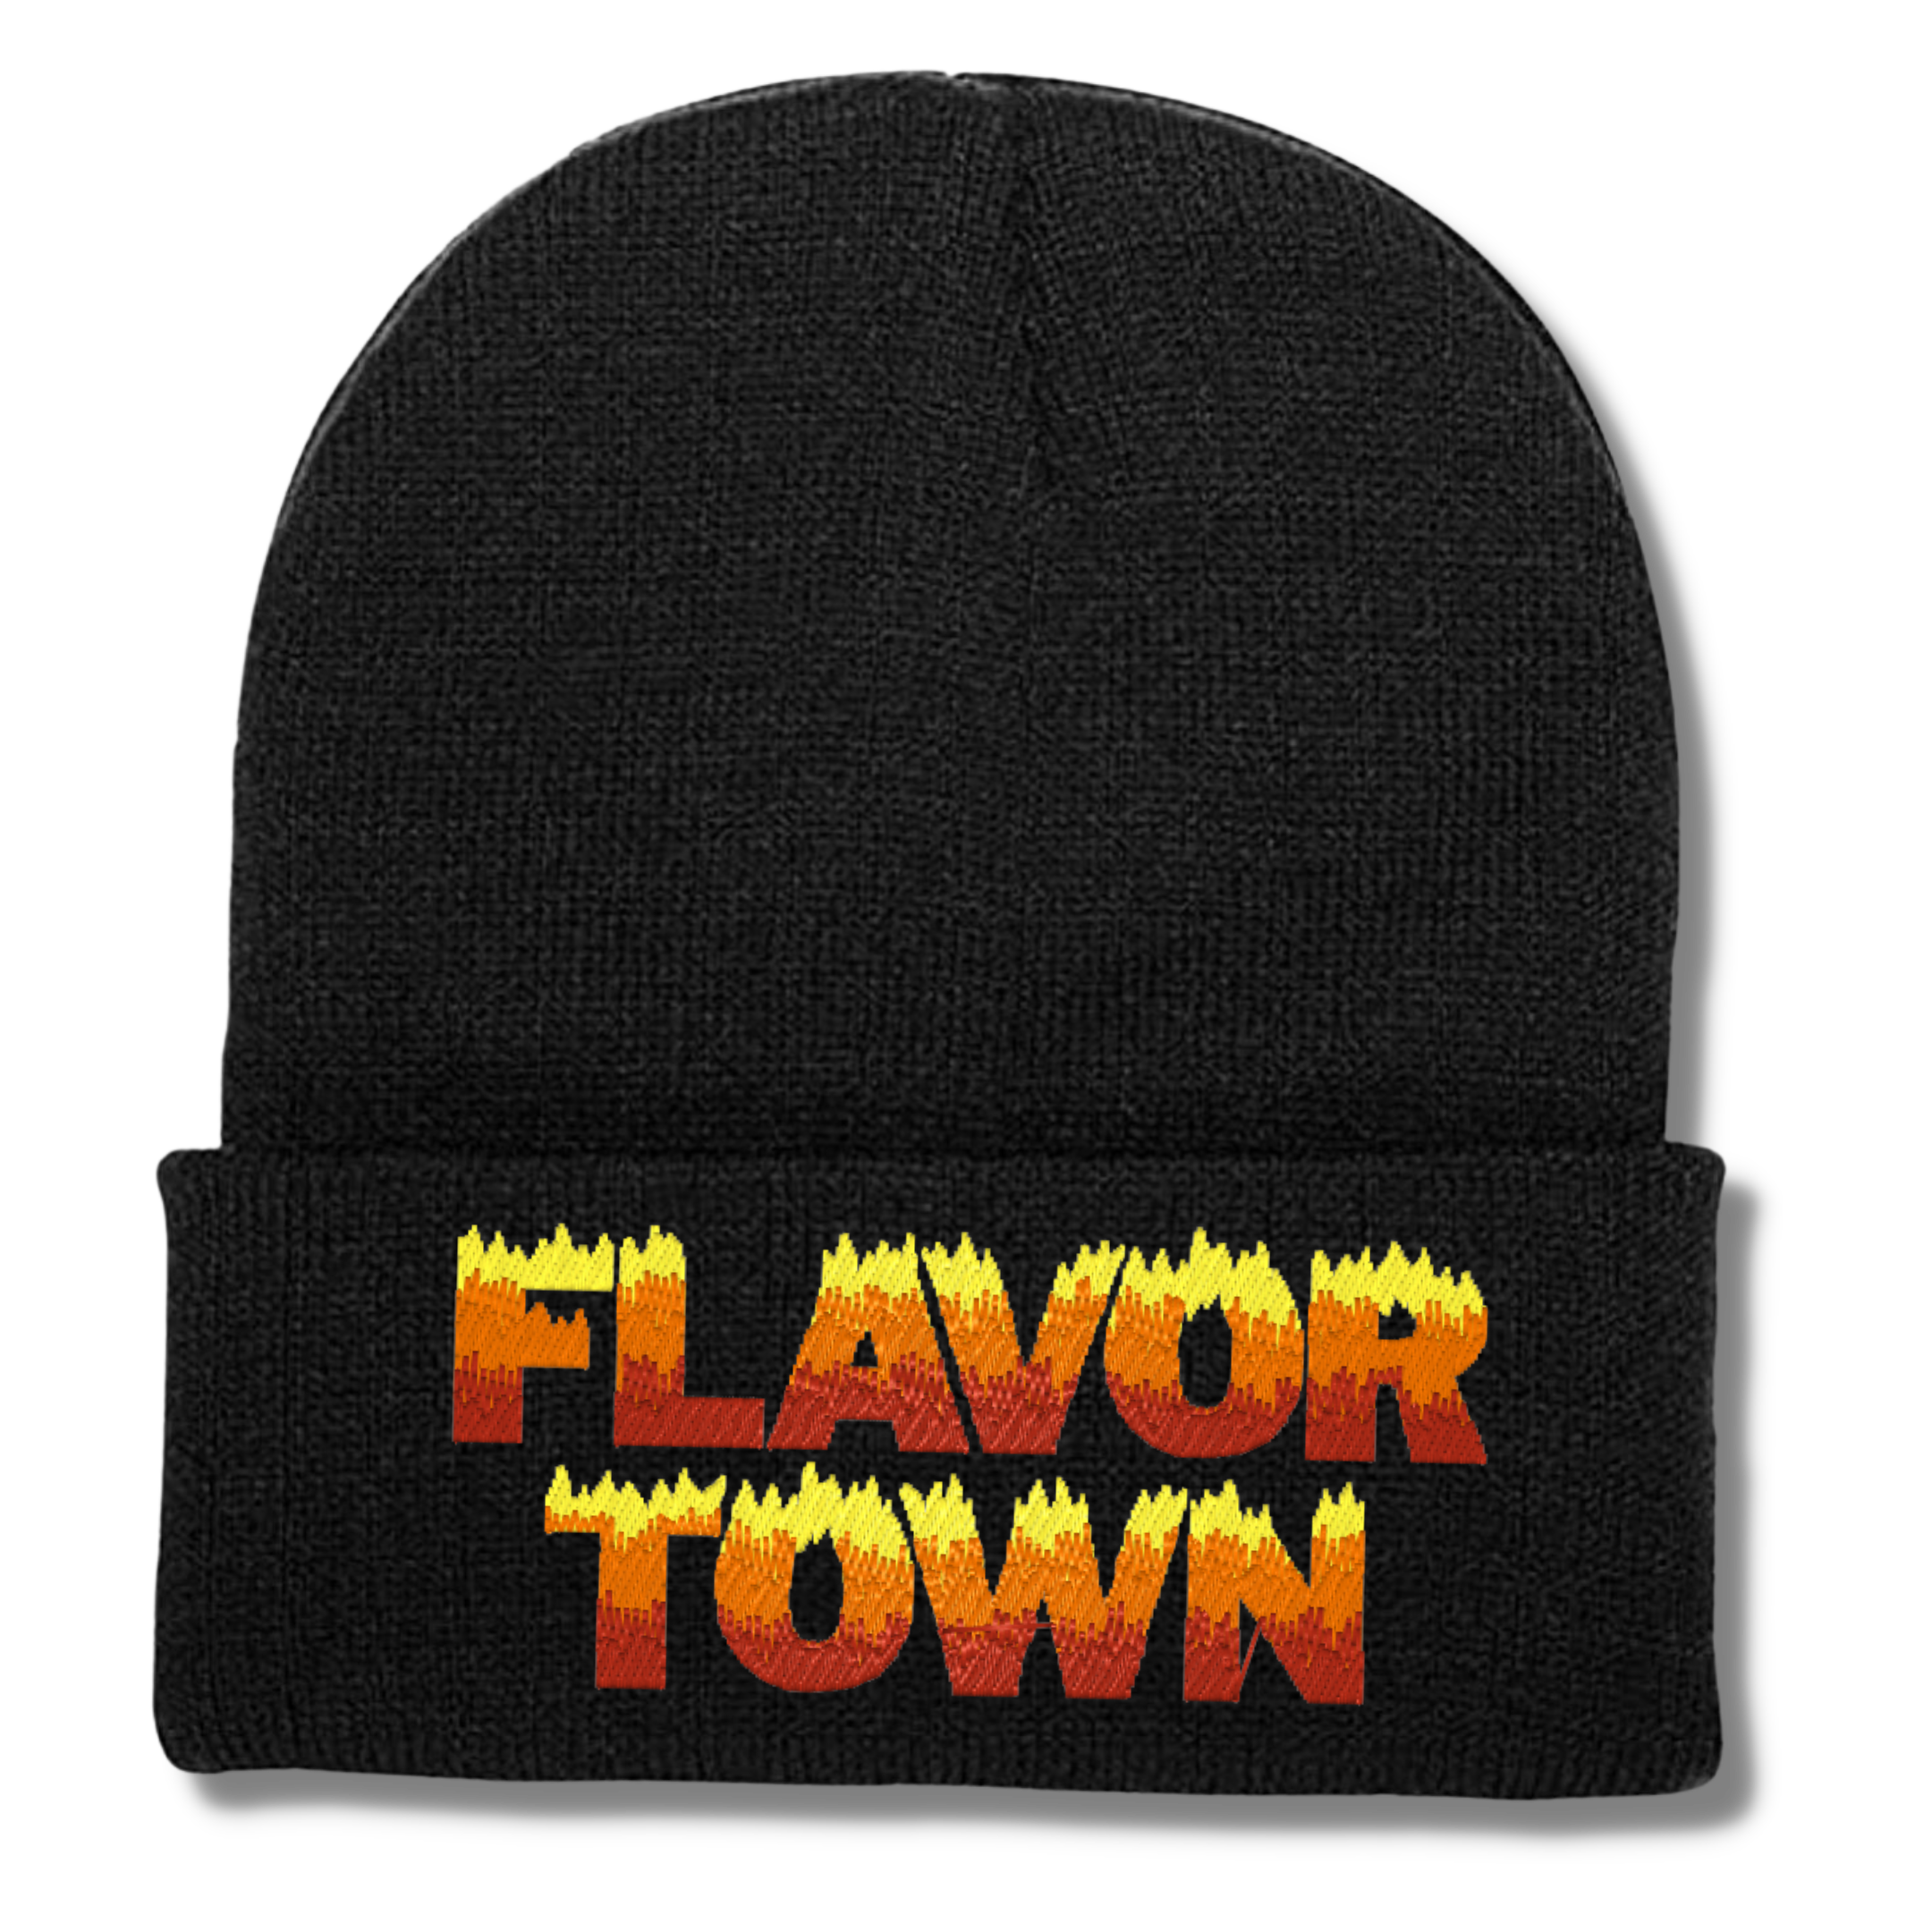 FLAVOR TOWN Flame Font Embroidered Beanie Hat, One Size Fits All